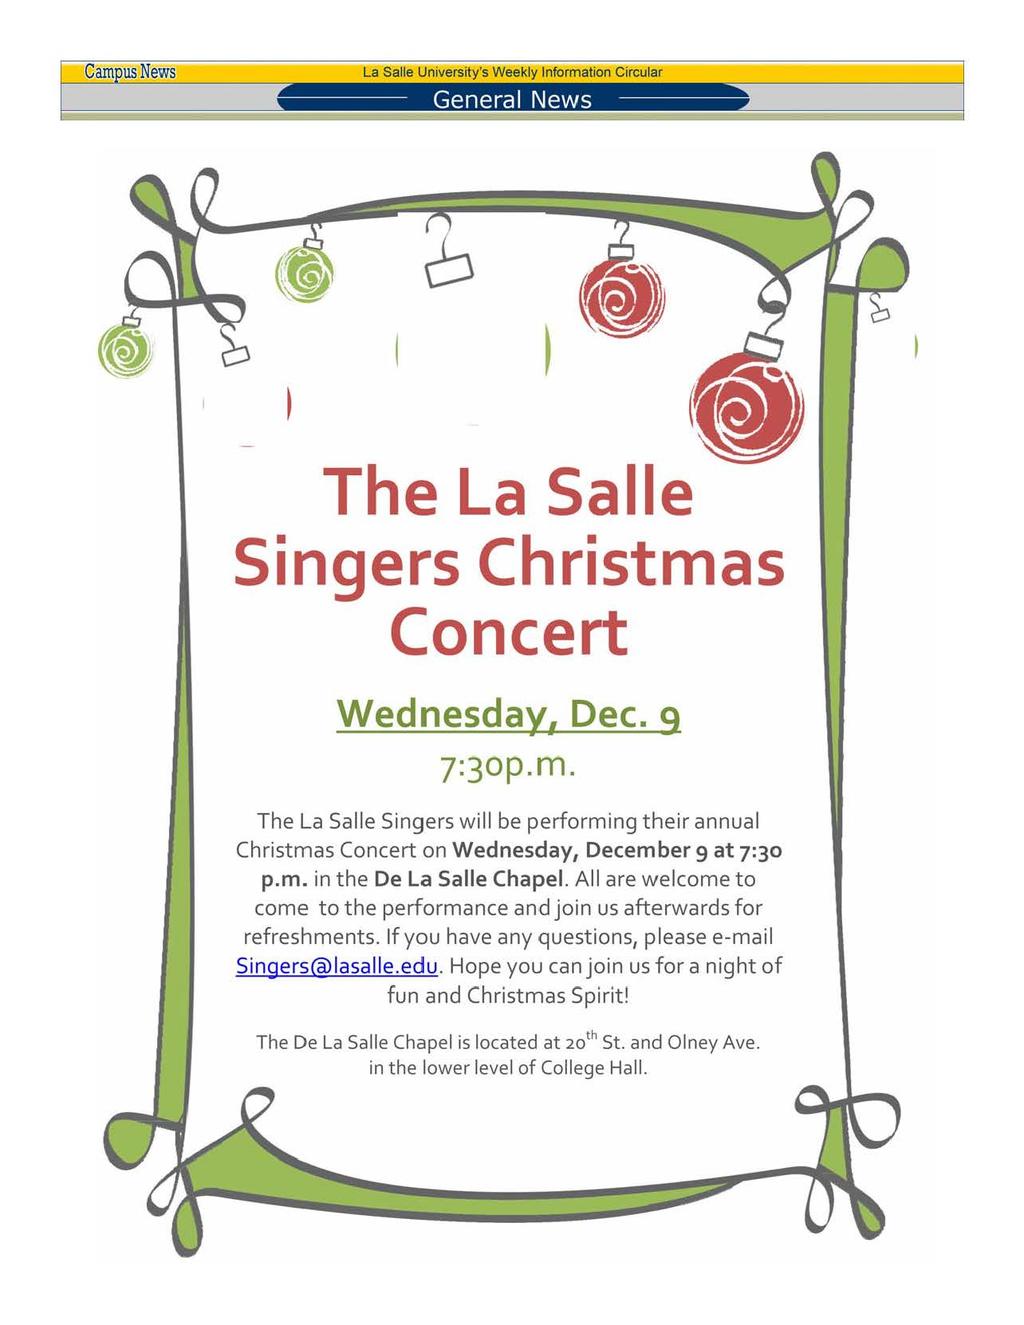 Cam usnews La Salle University's Weekly Information Circular General News Page 9 Wednesday, Dec. 9 7:3op.m. The La Salle Singers will be performing t heir annual Christmas Concert on Wednesday, Decem ber 9 at 7:30 p.